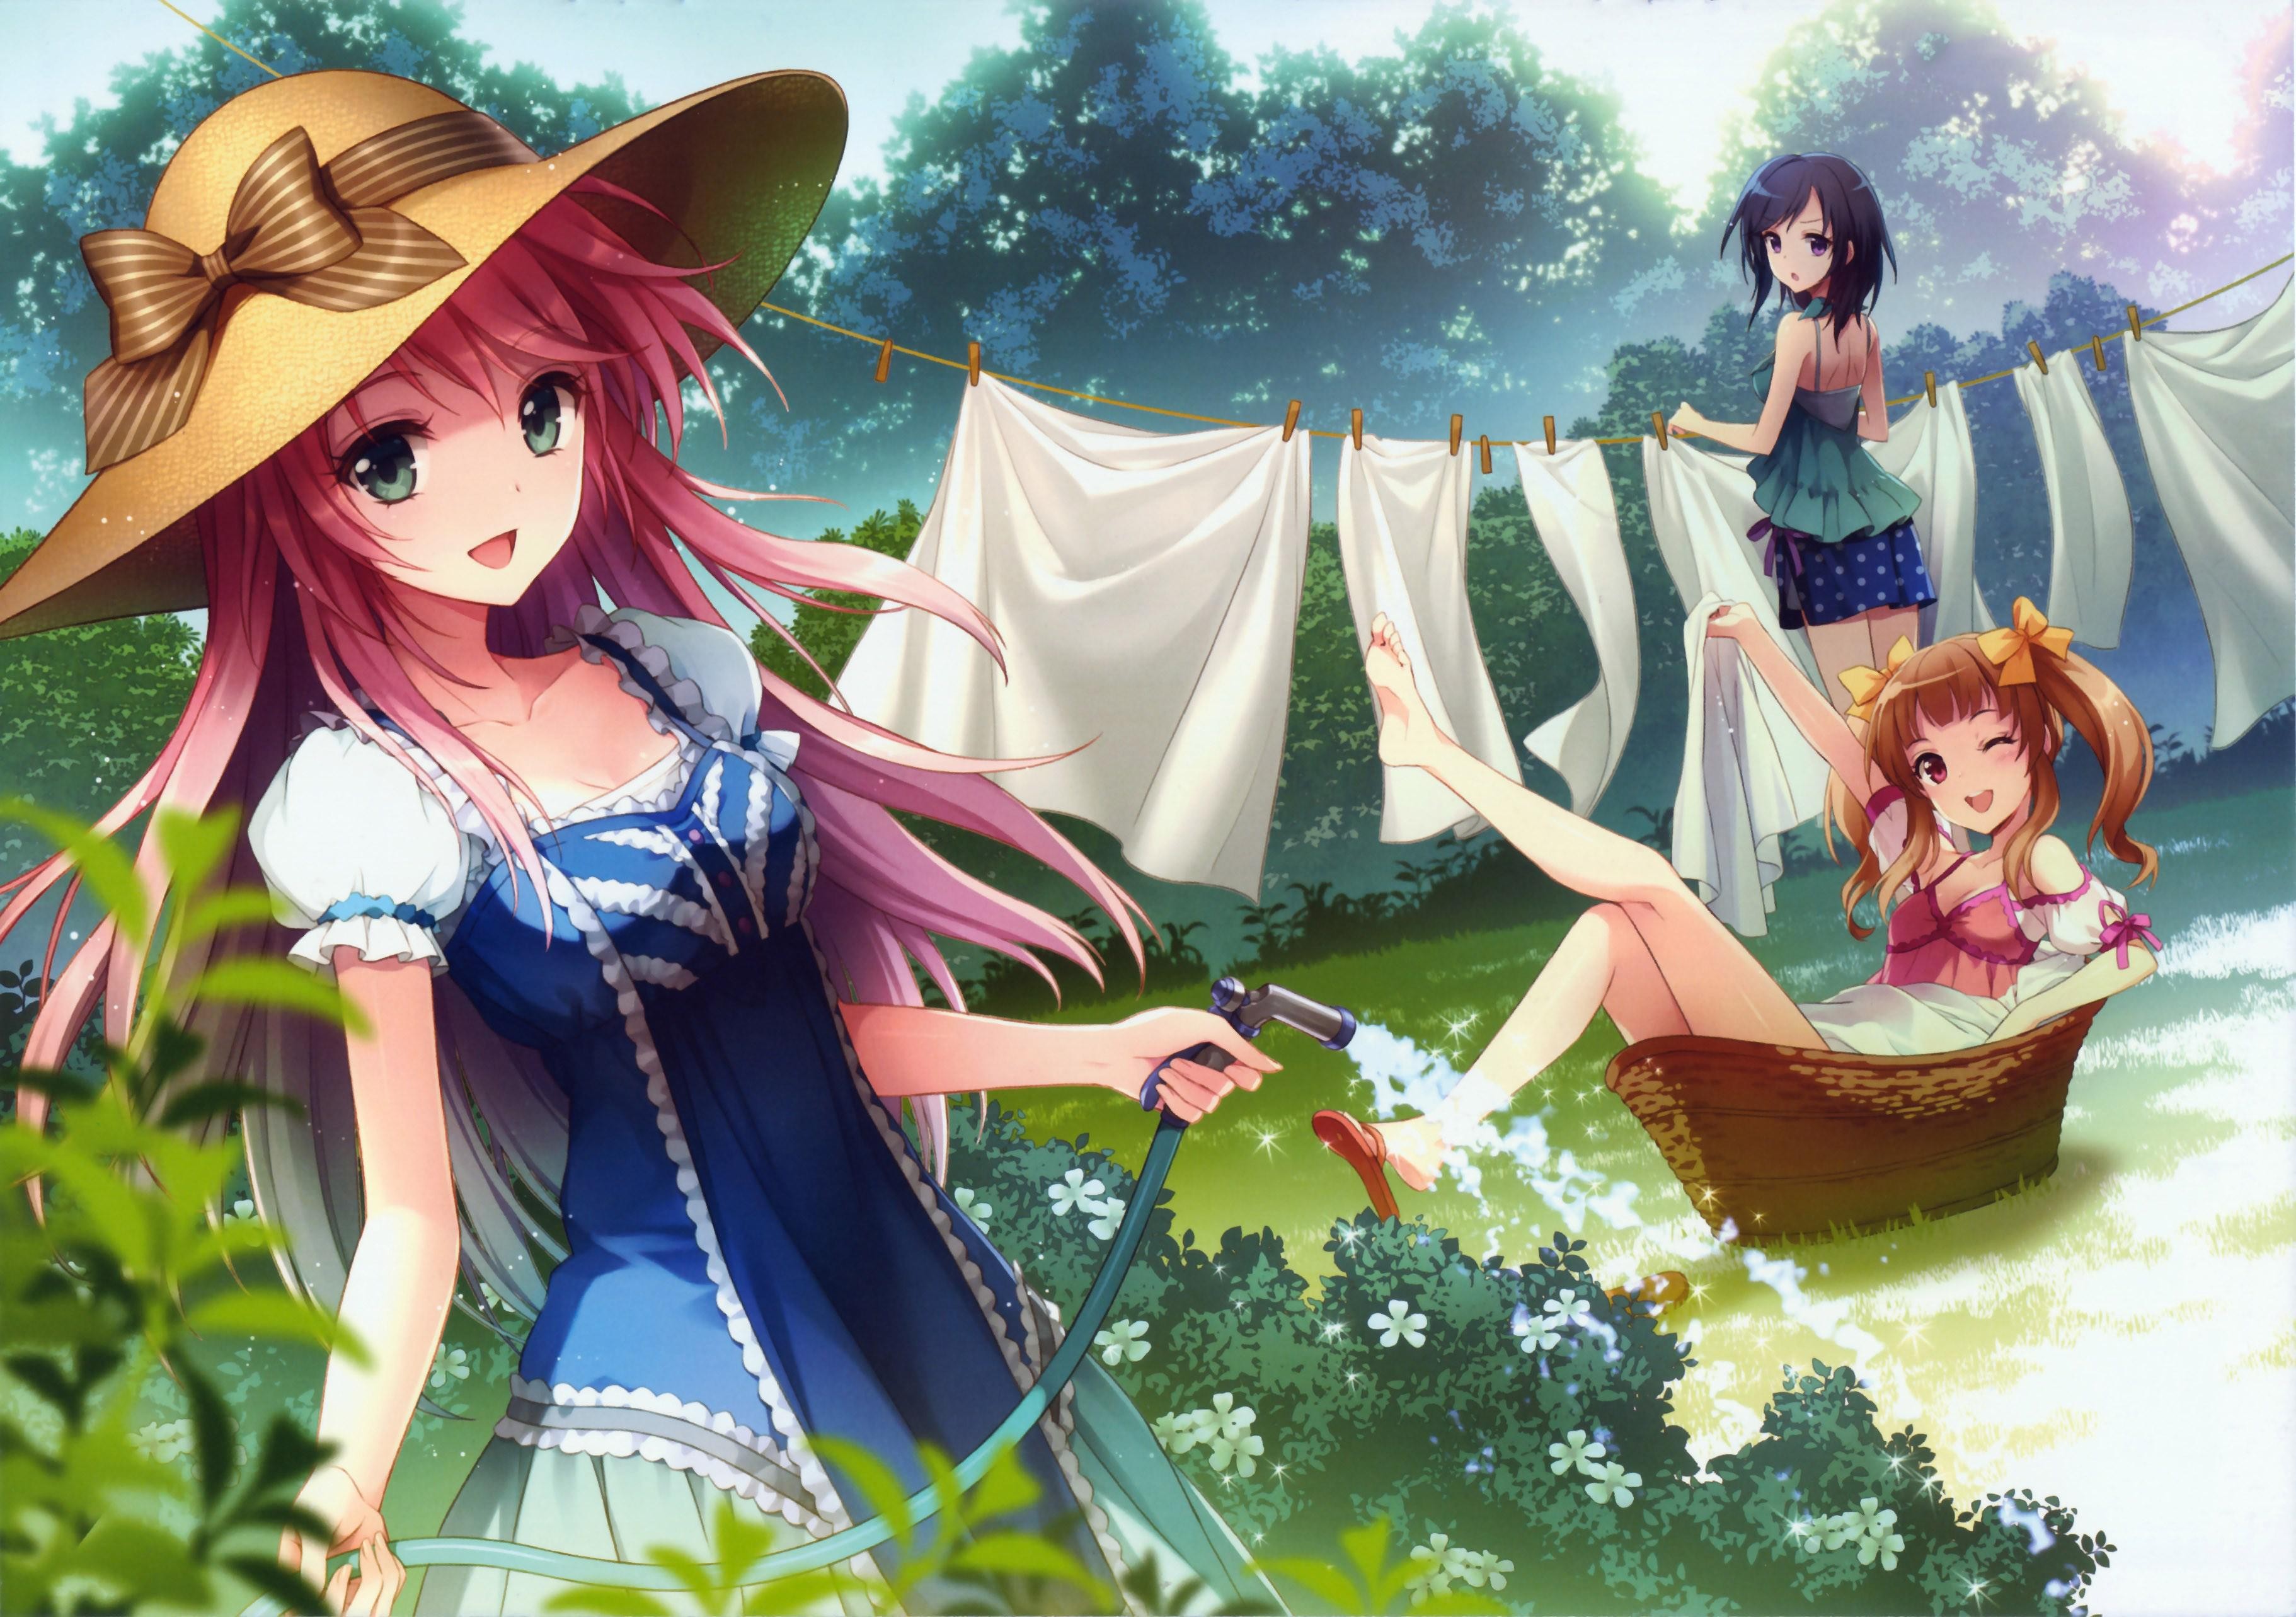 Anime 3644x2566 hat anime laundry women with hats anime girls